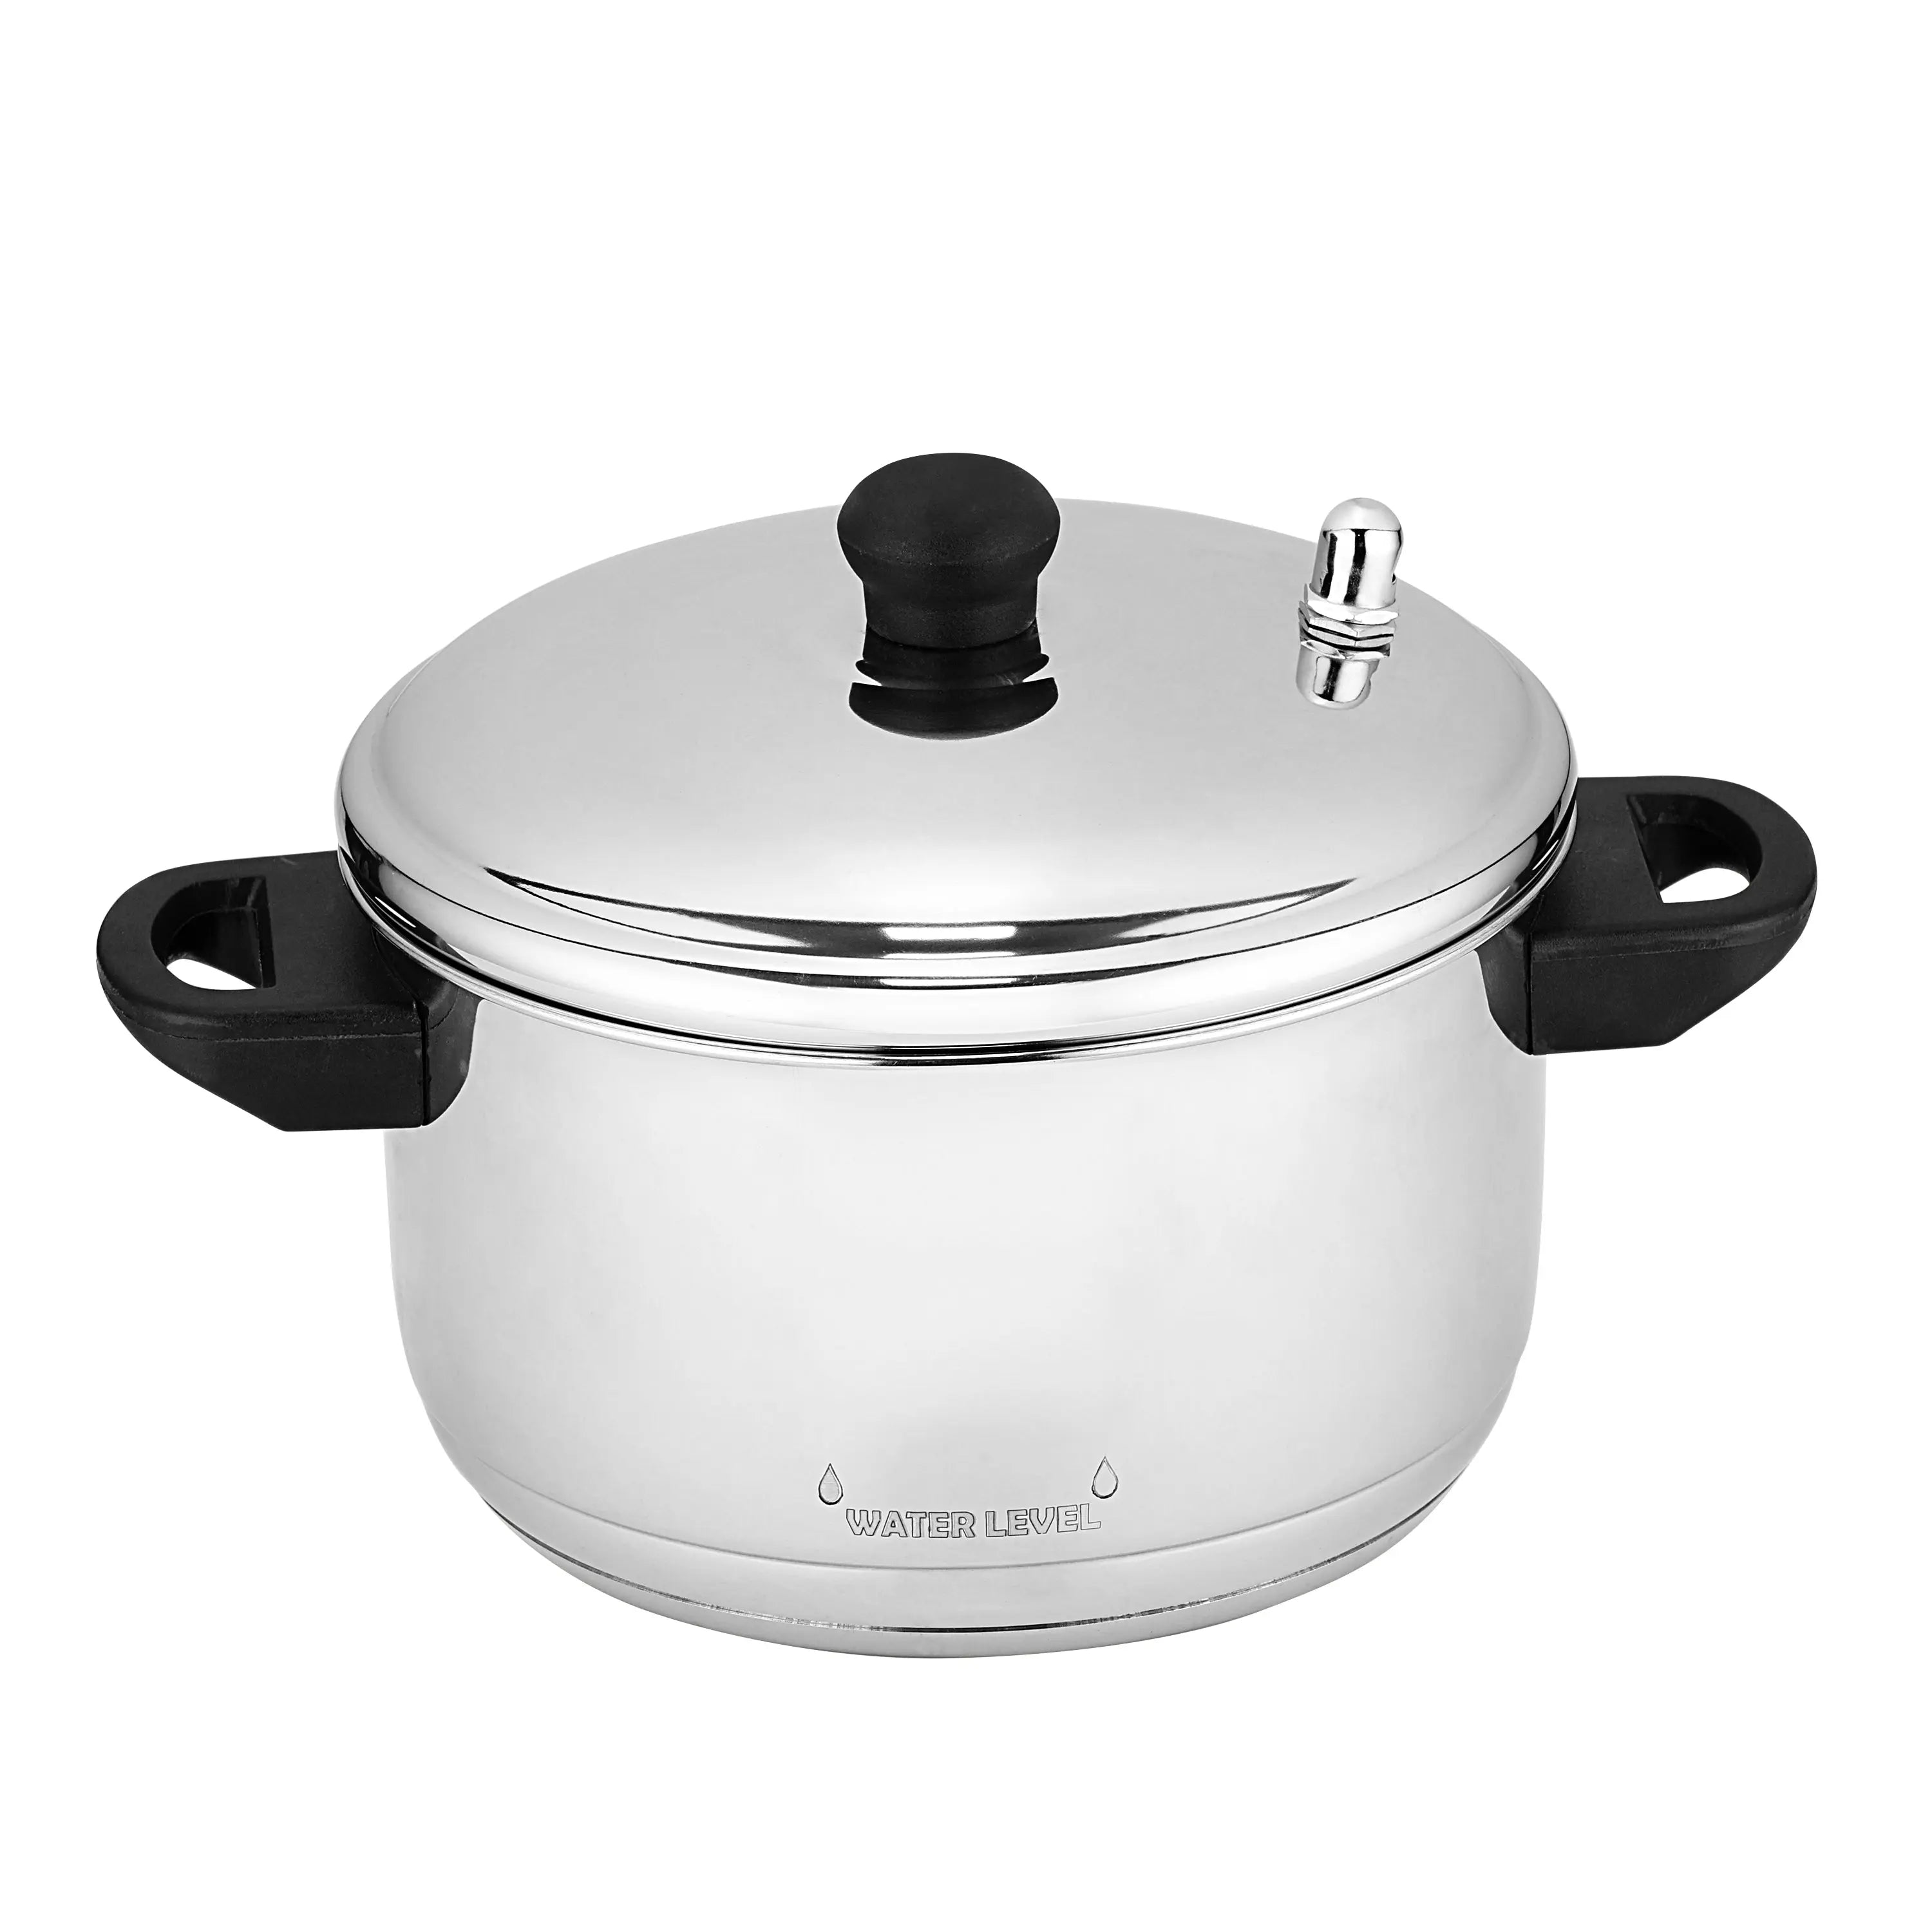 STAINLESS STEEL IDLY COOKER 4 LAYER - CROCKERY WALA AND COMPANY 